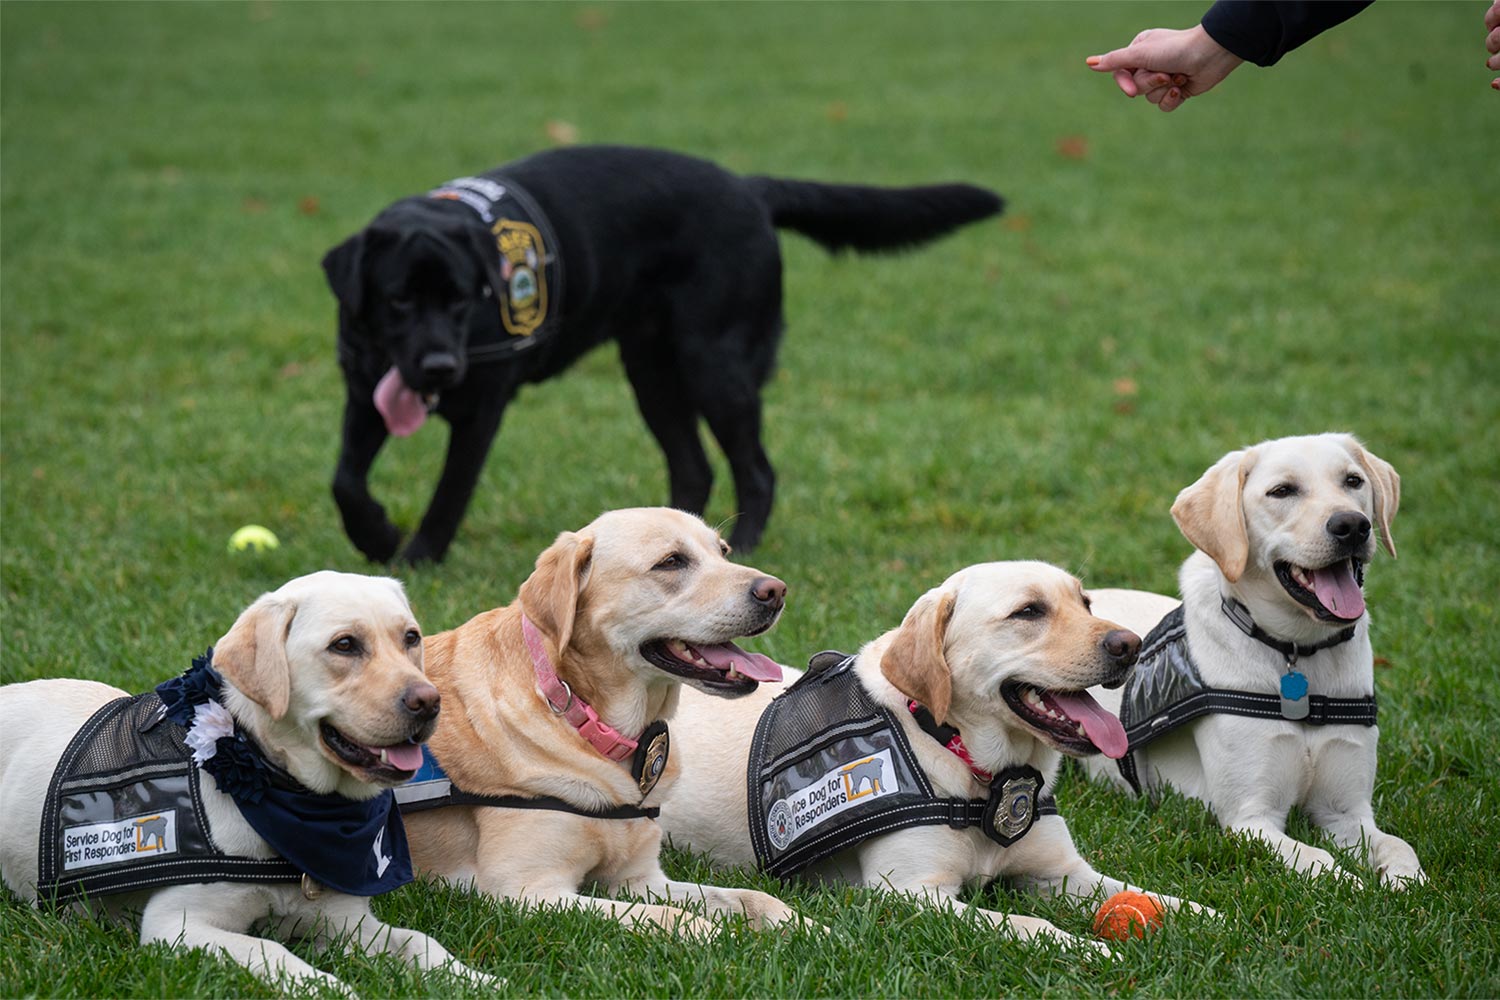 Comfort Dogs and Community Policing are Working!